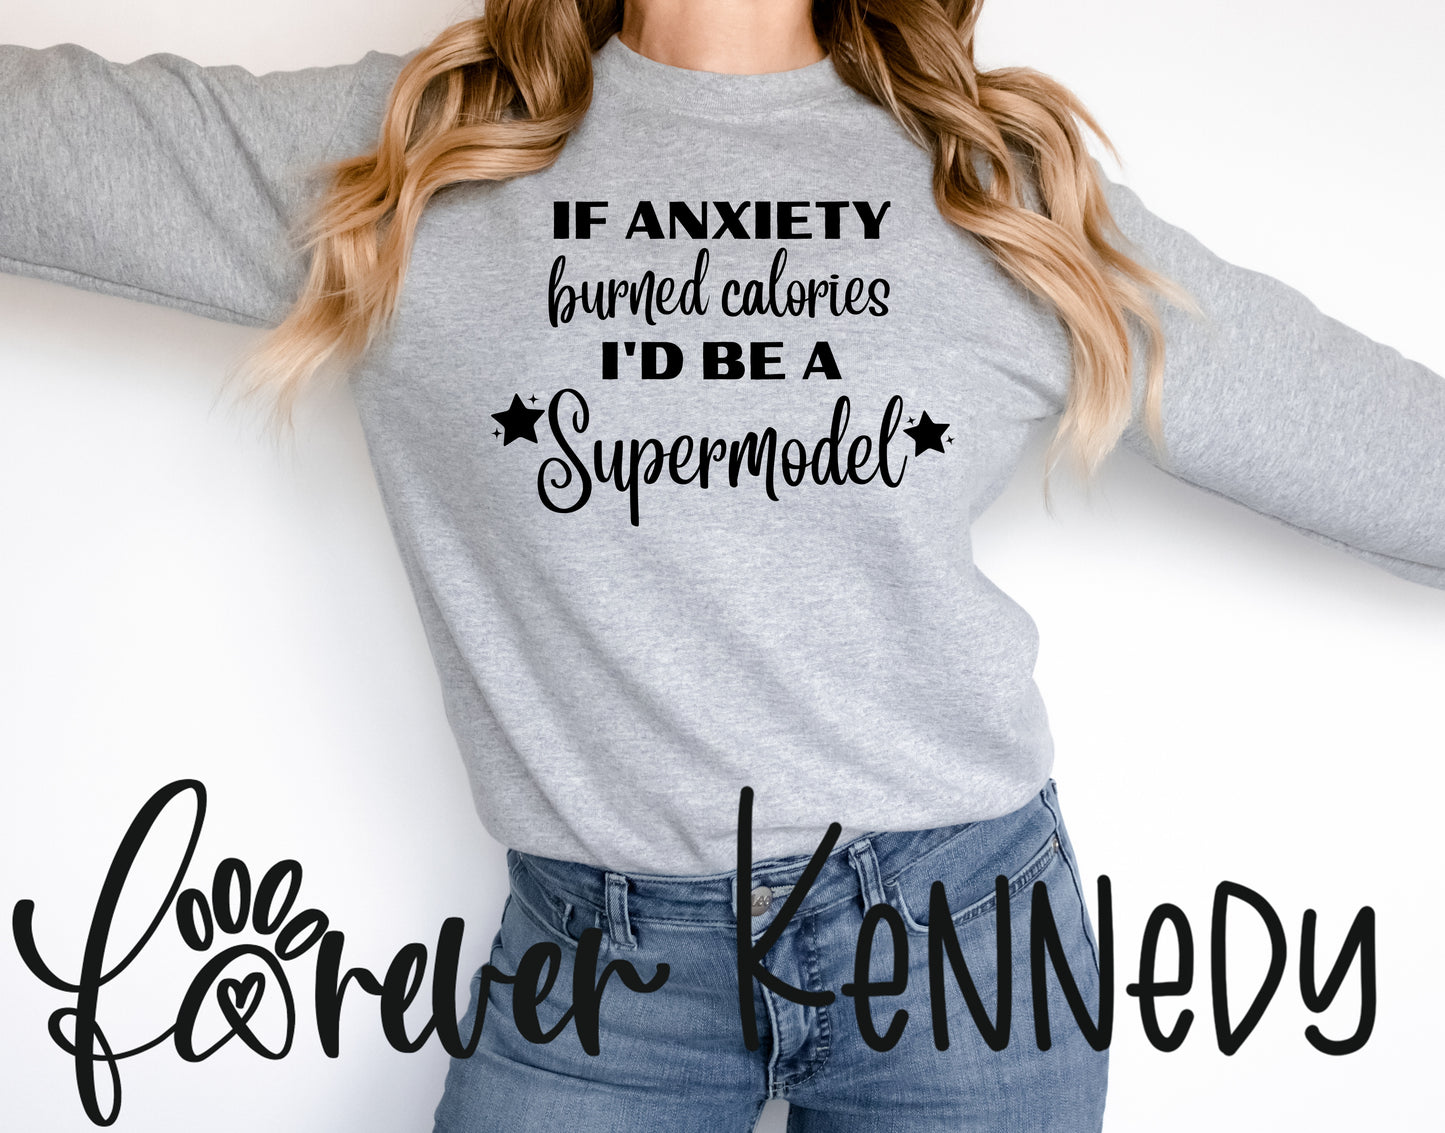 (MTO) Pick your Apparel: Anxiety / Supermodel